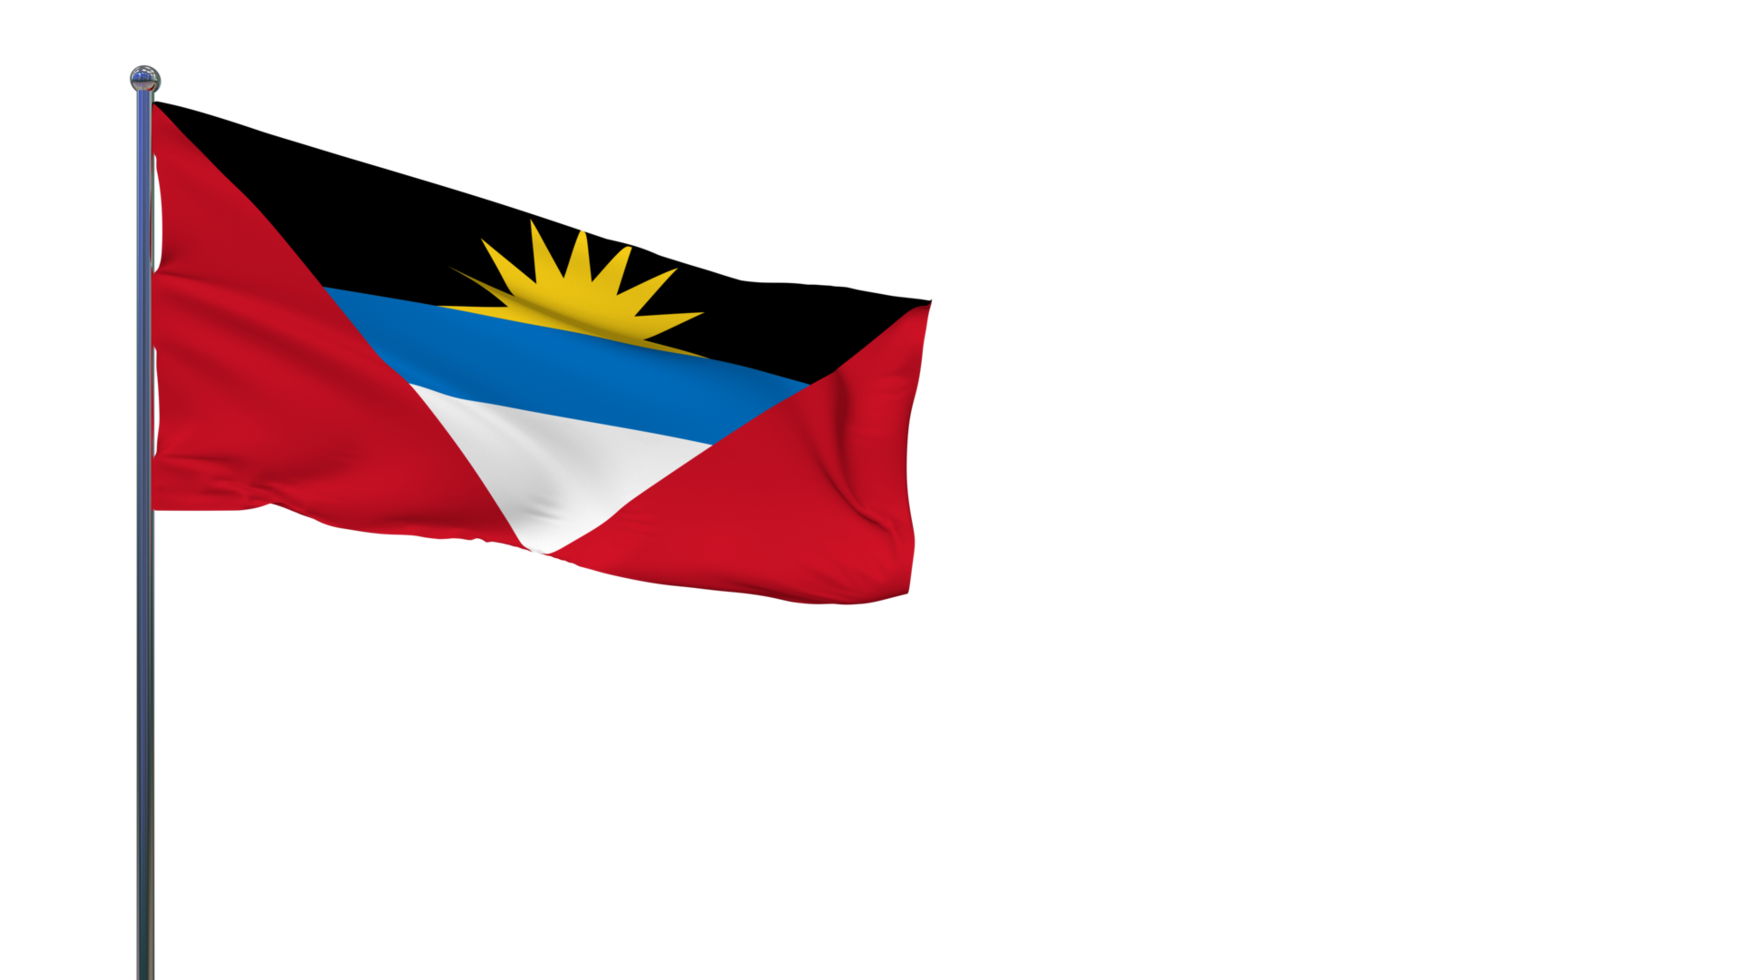 Antigua an Barbuda Flag Waving in The Wind 3D Rendering, National Day, Independence Day png